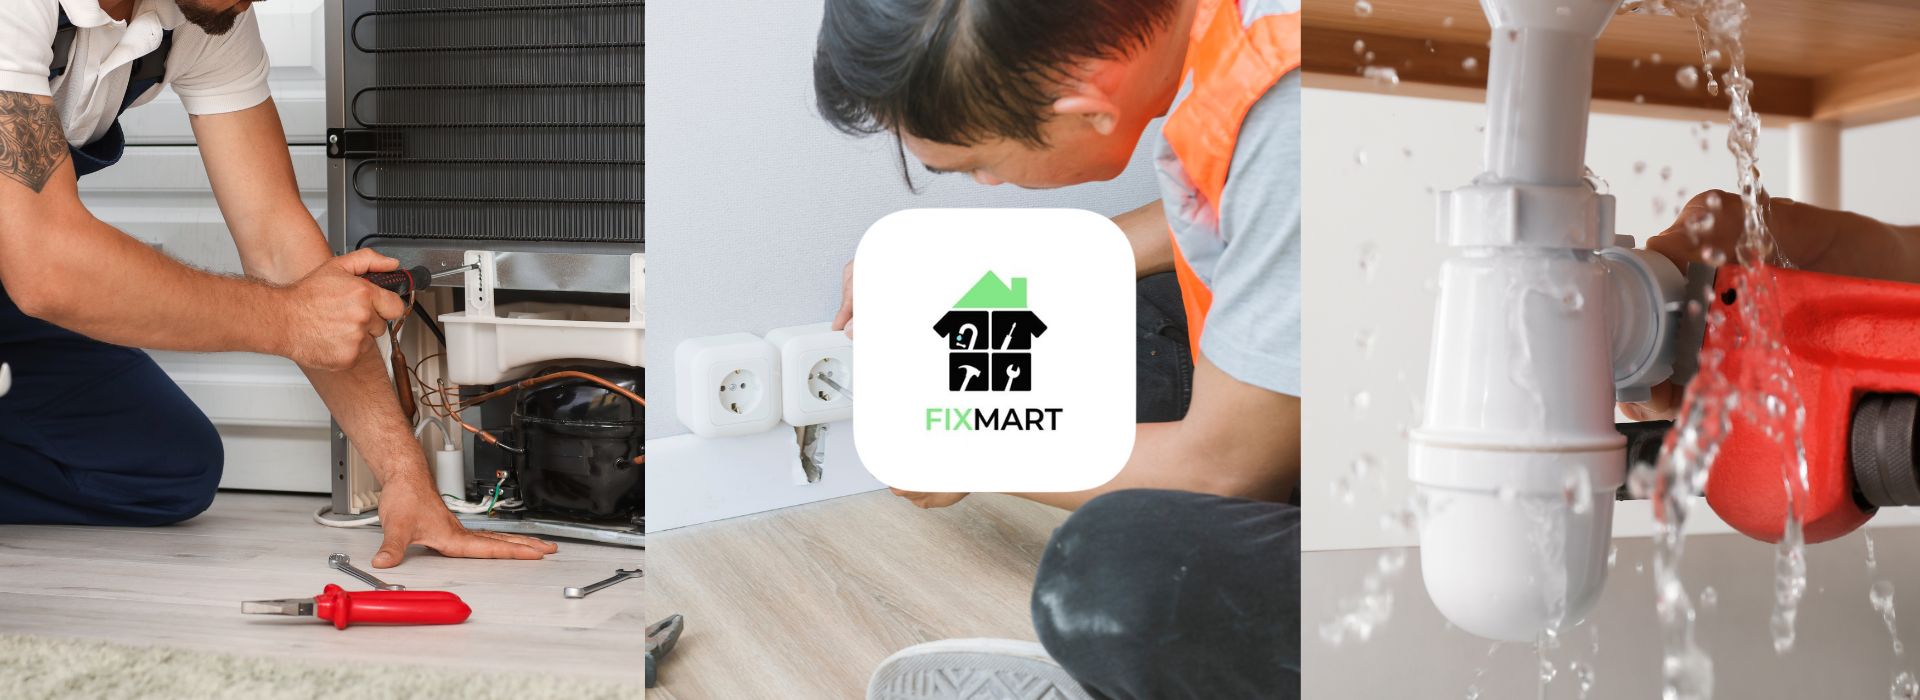 Home Cleaning Services in Singapore: FixMart’s Unique Approach